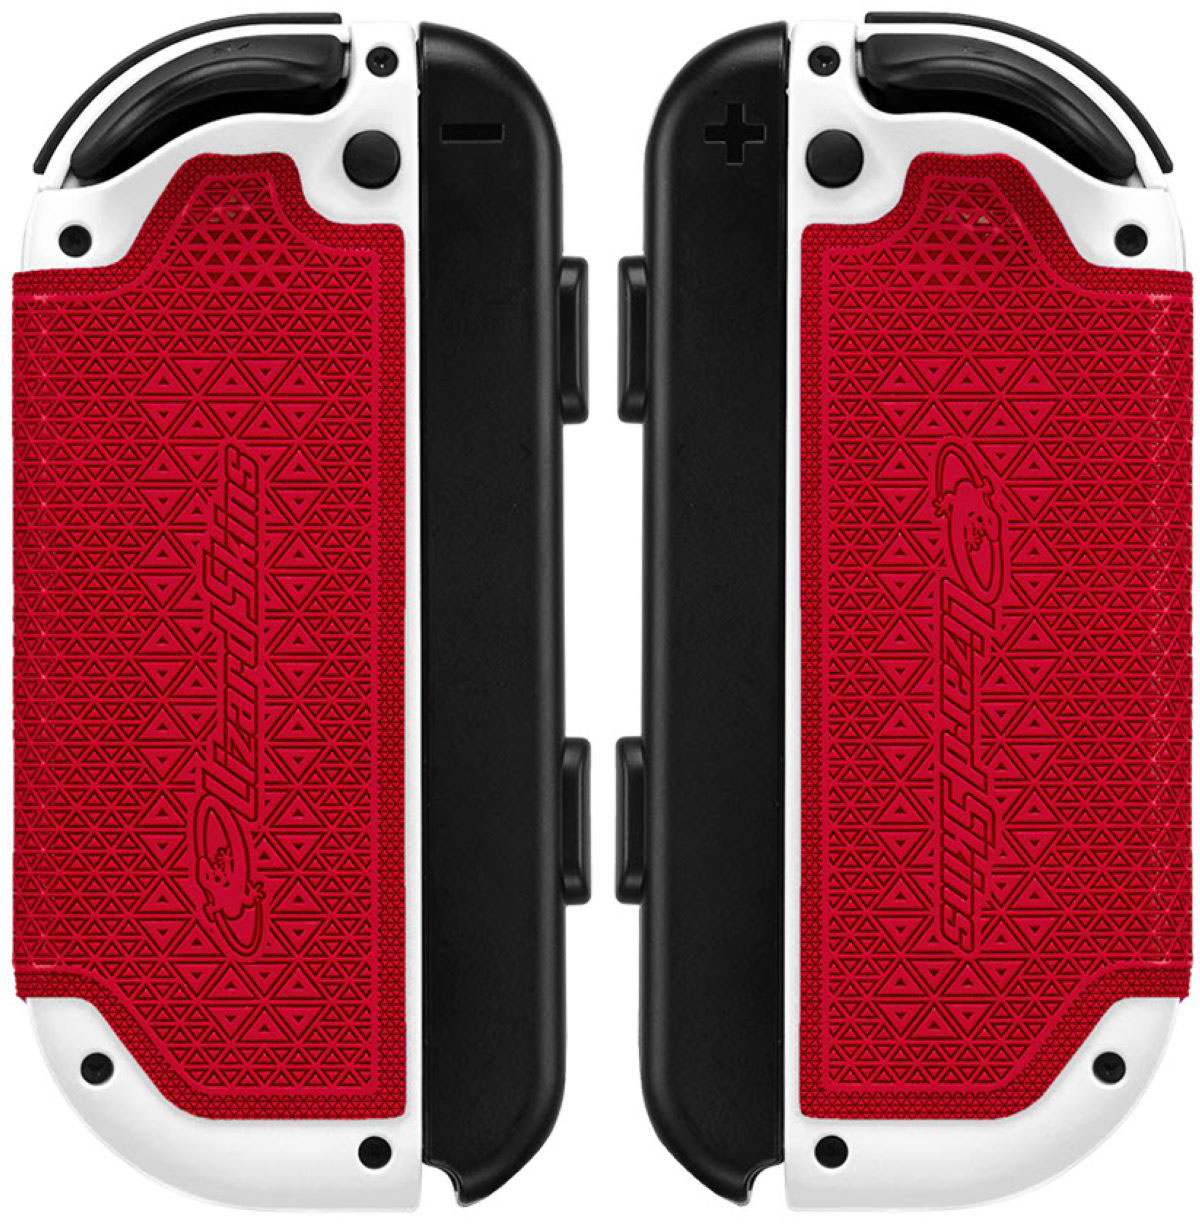 Back View: Lizard Skins - DSP Controller Grip for Switch Joy-Con - Red